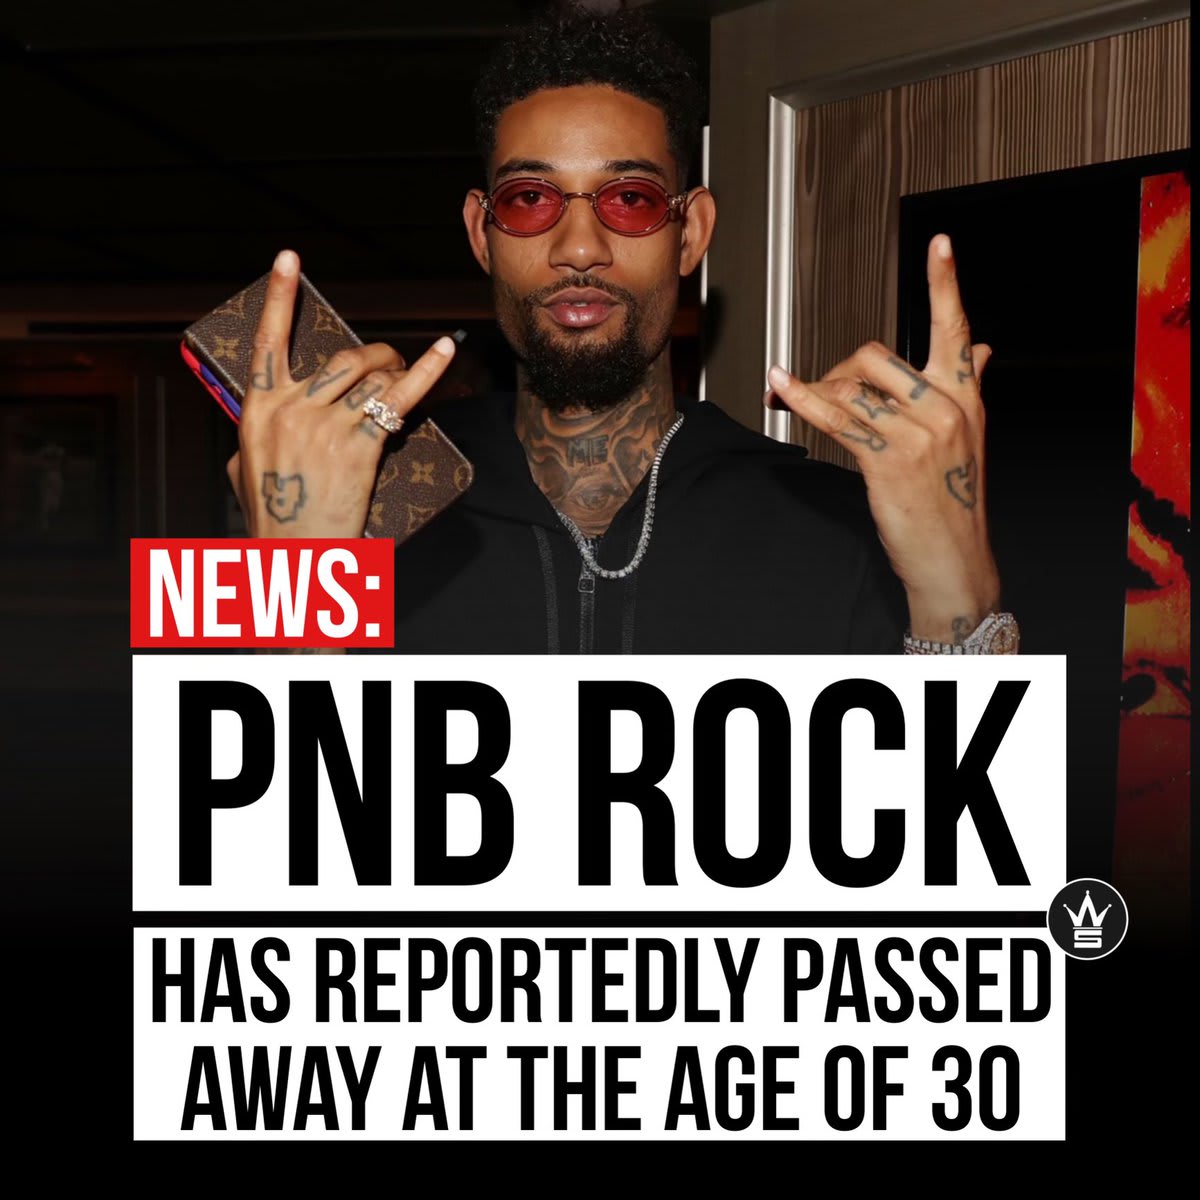 According to reports, PnBRock has died at the age of 30 after being shot at Roscoe’s Chicken & Waffles earlier today in LA. Our thoughts and prayers are with his family and friends.